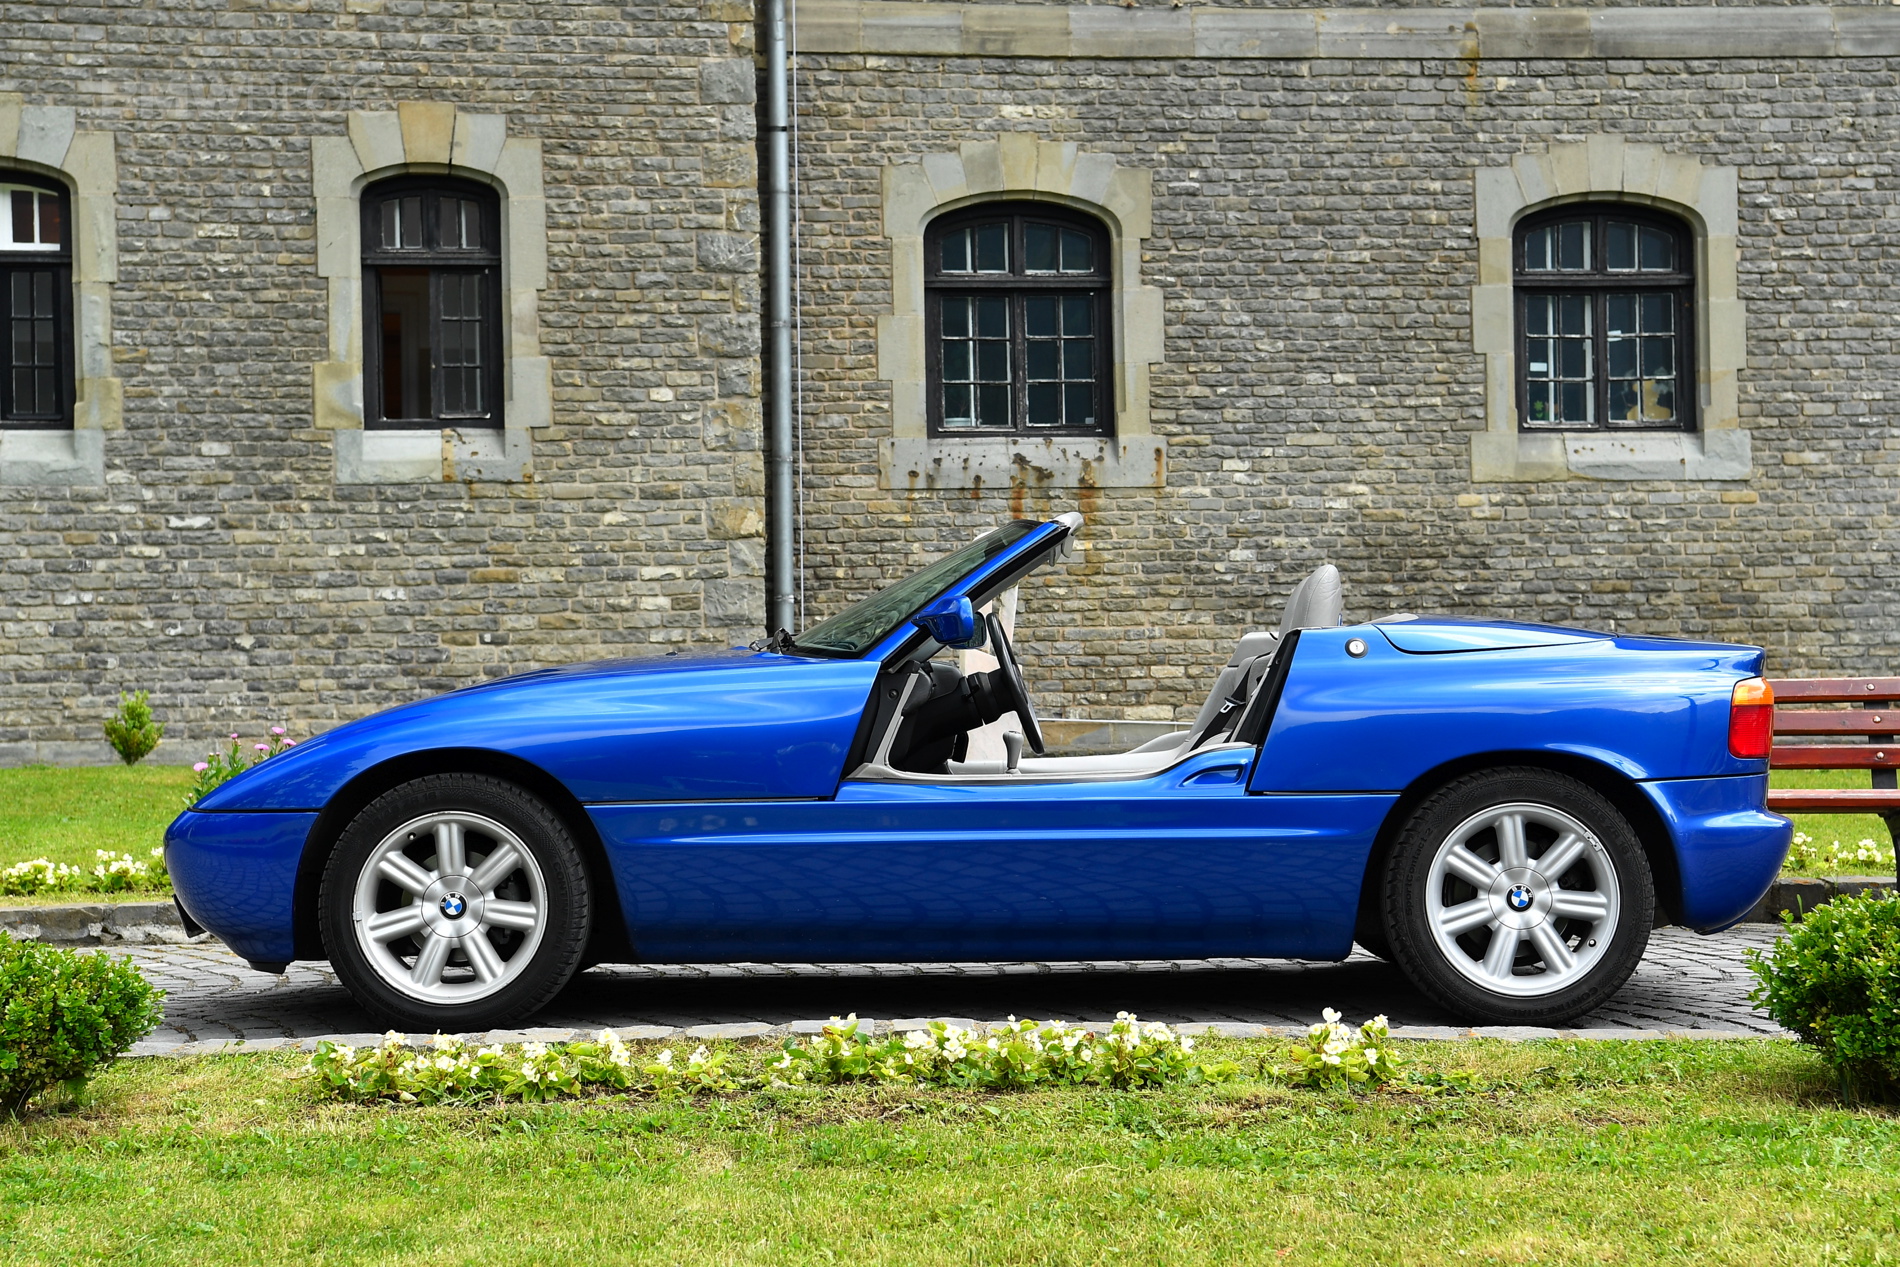 Top Gear's Retro Review of the BMW Z1